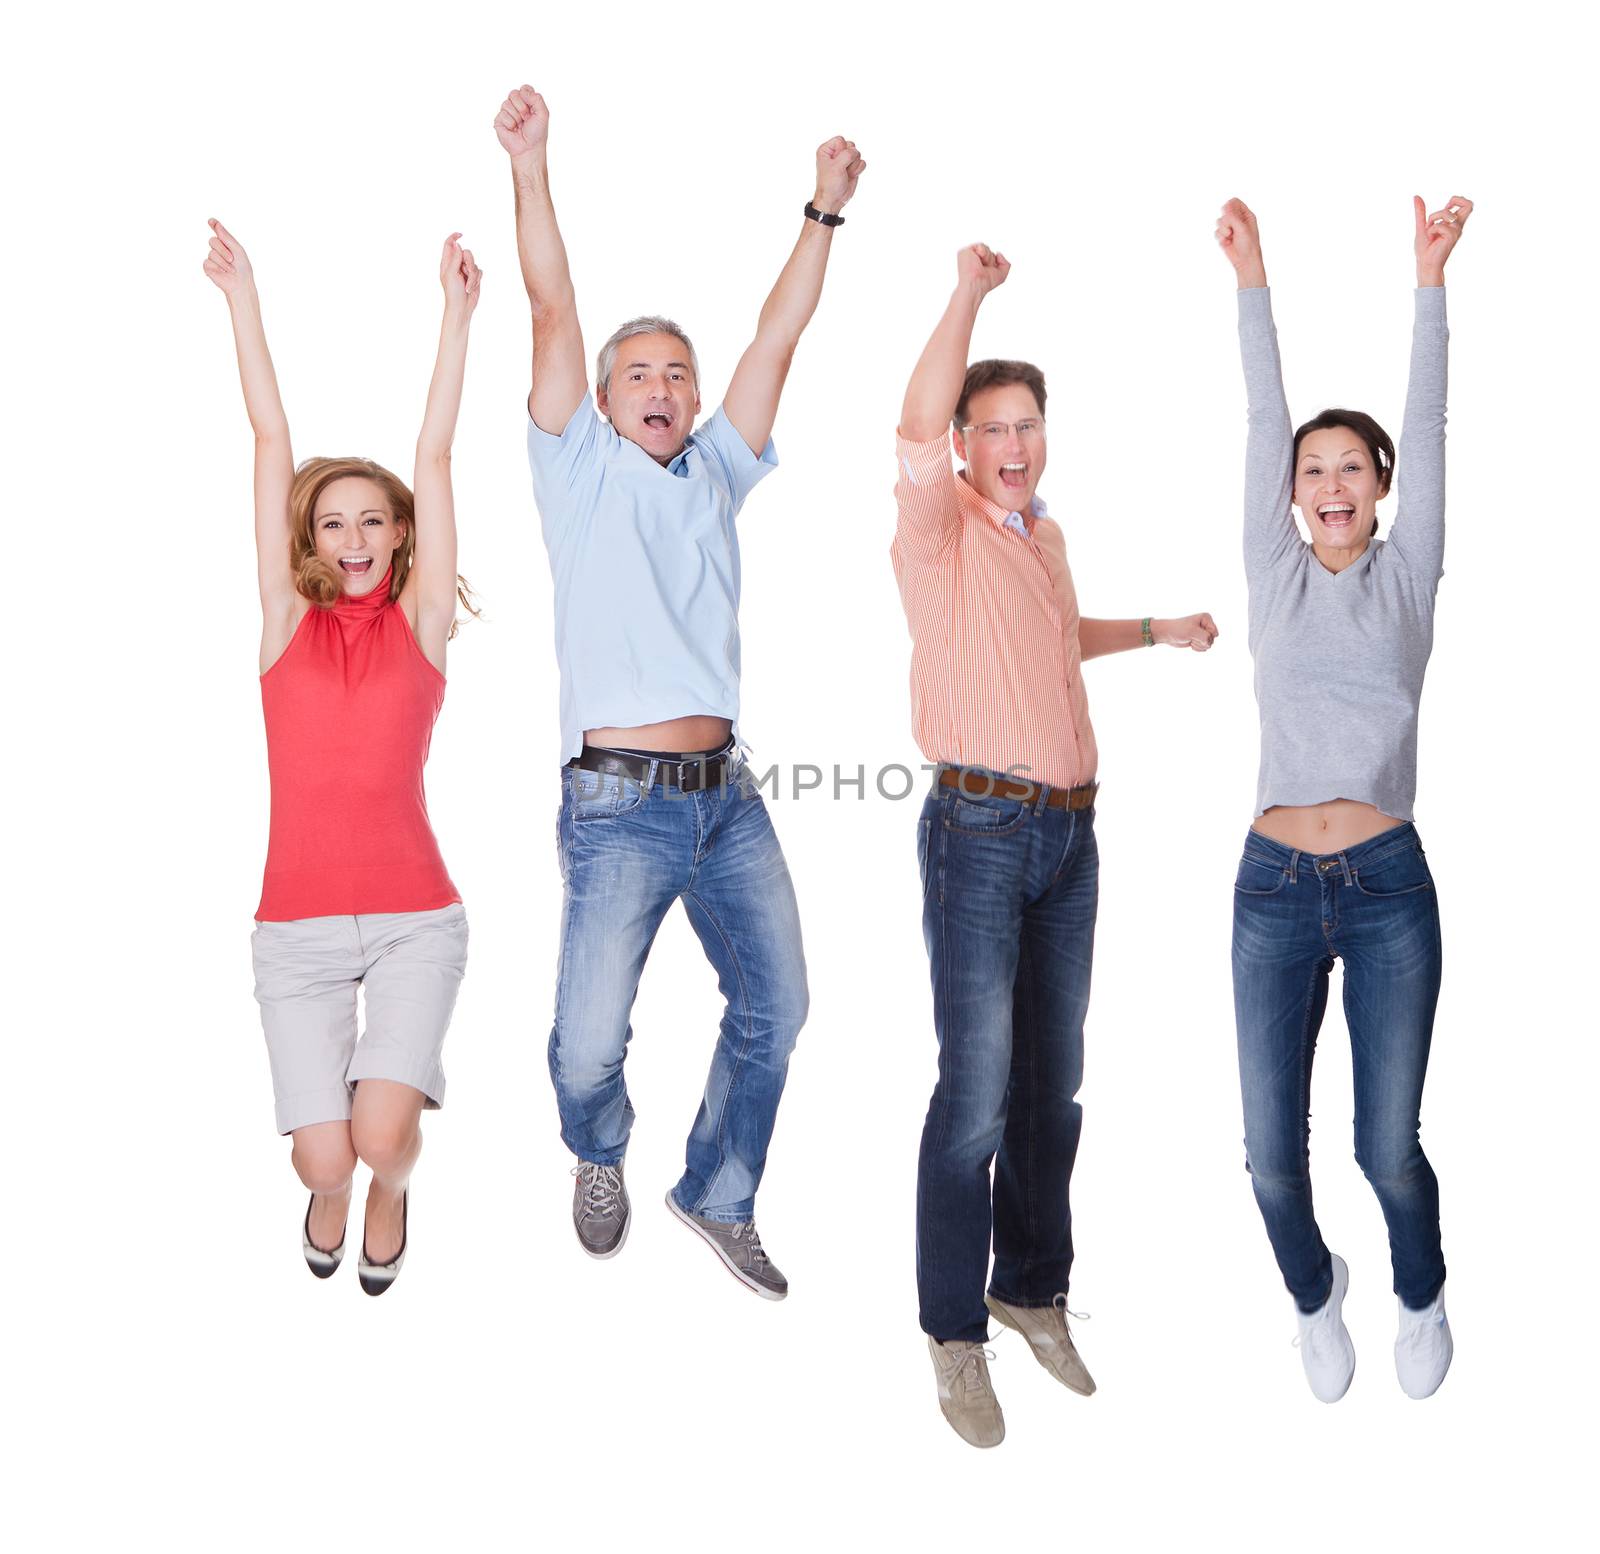 Two happy couples in casual clothing jumping in the air rejoicing with their arms raised isolated on white